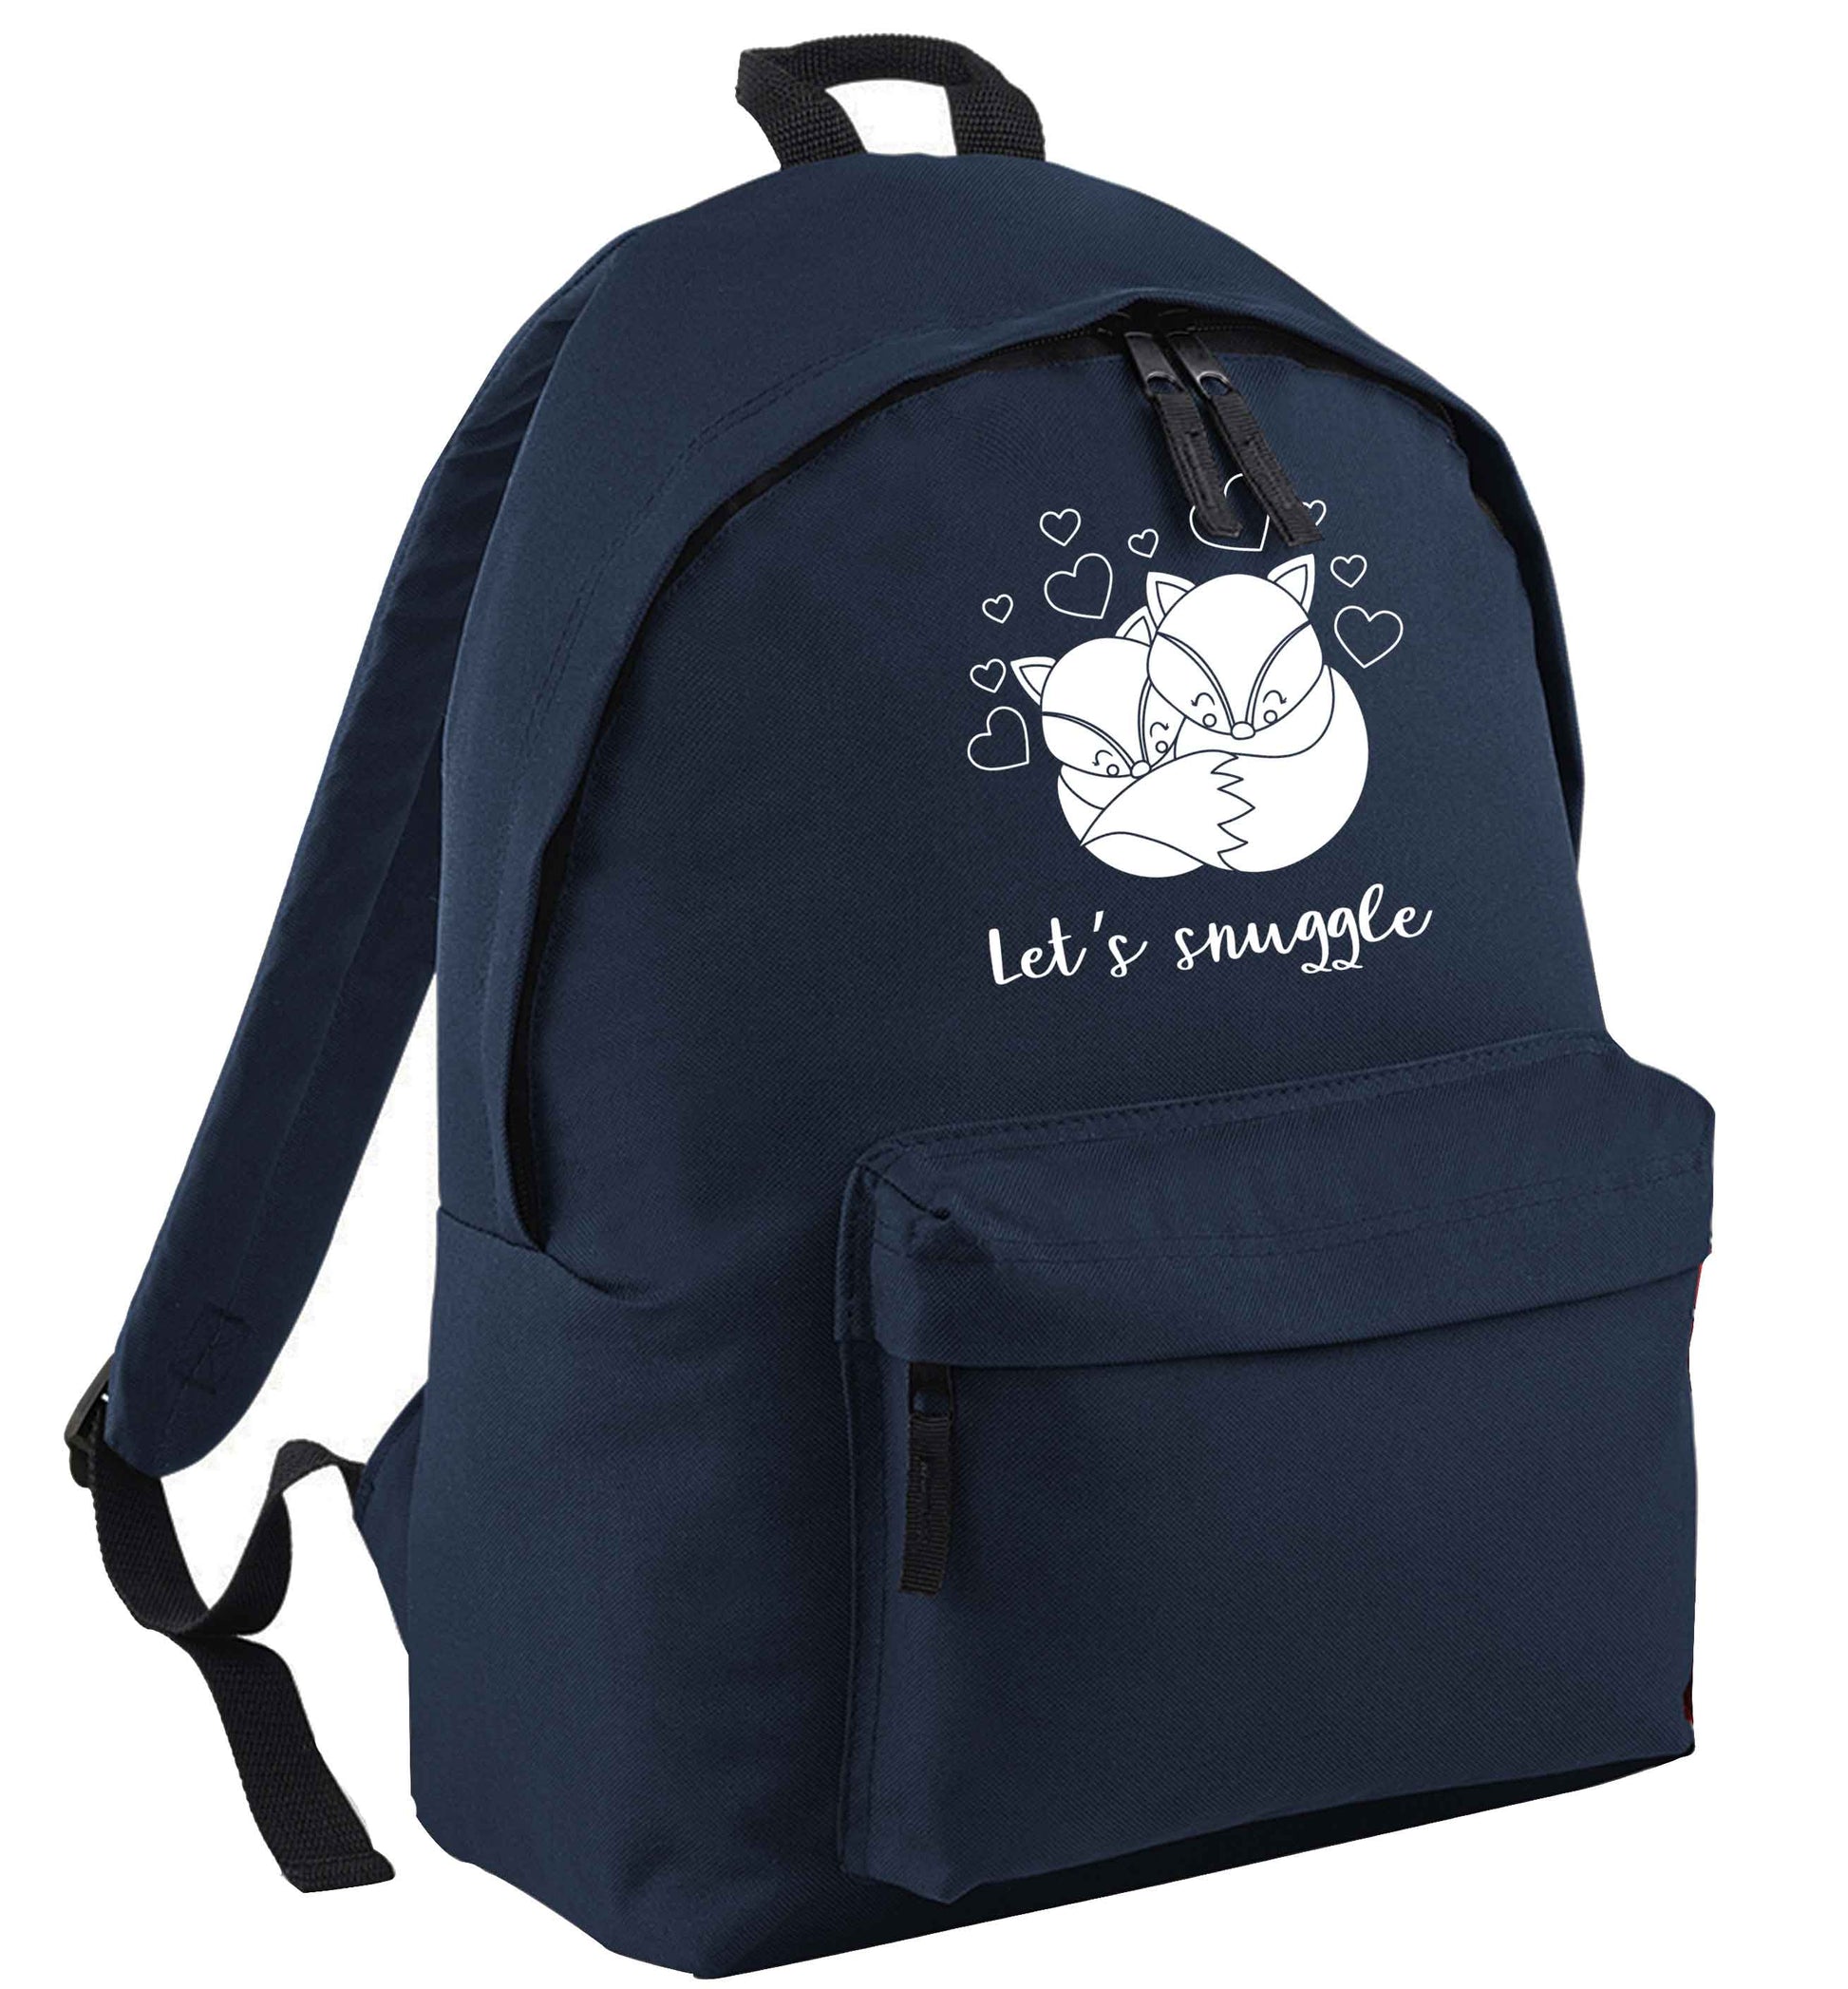 Let's snuggle navy adults backpack